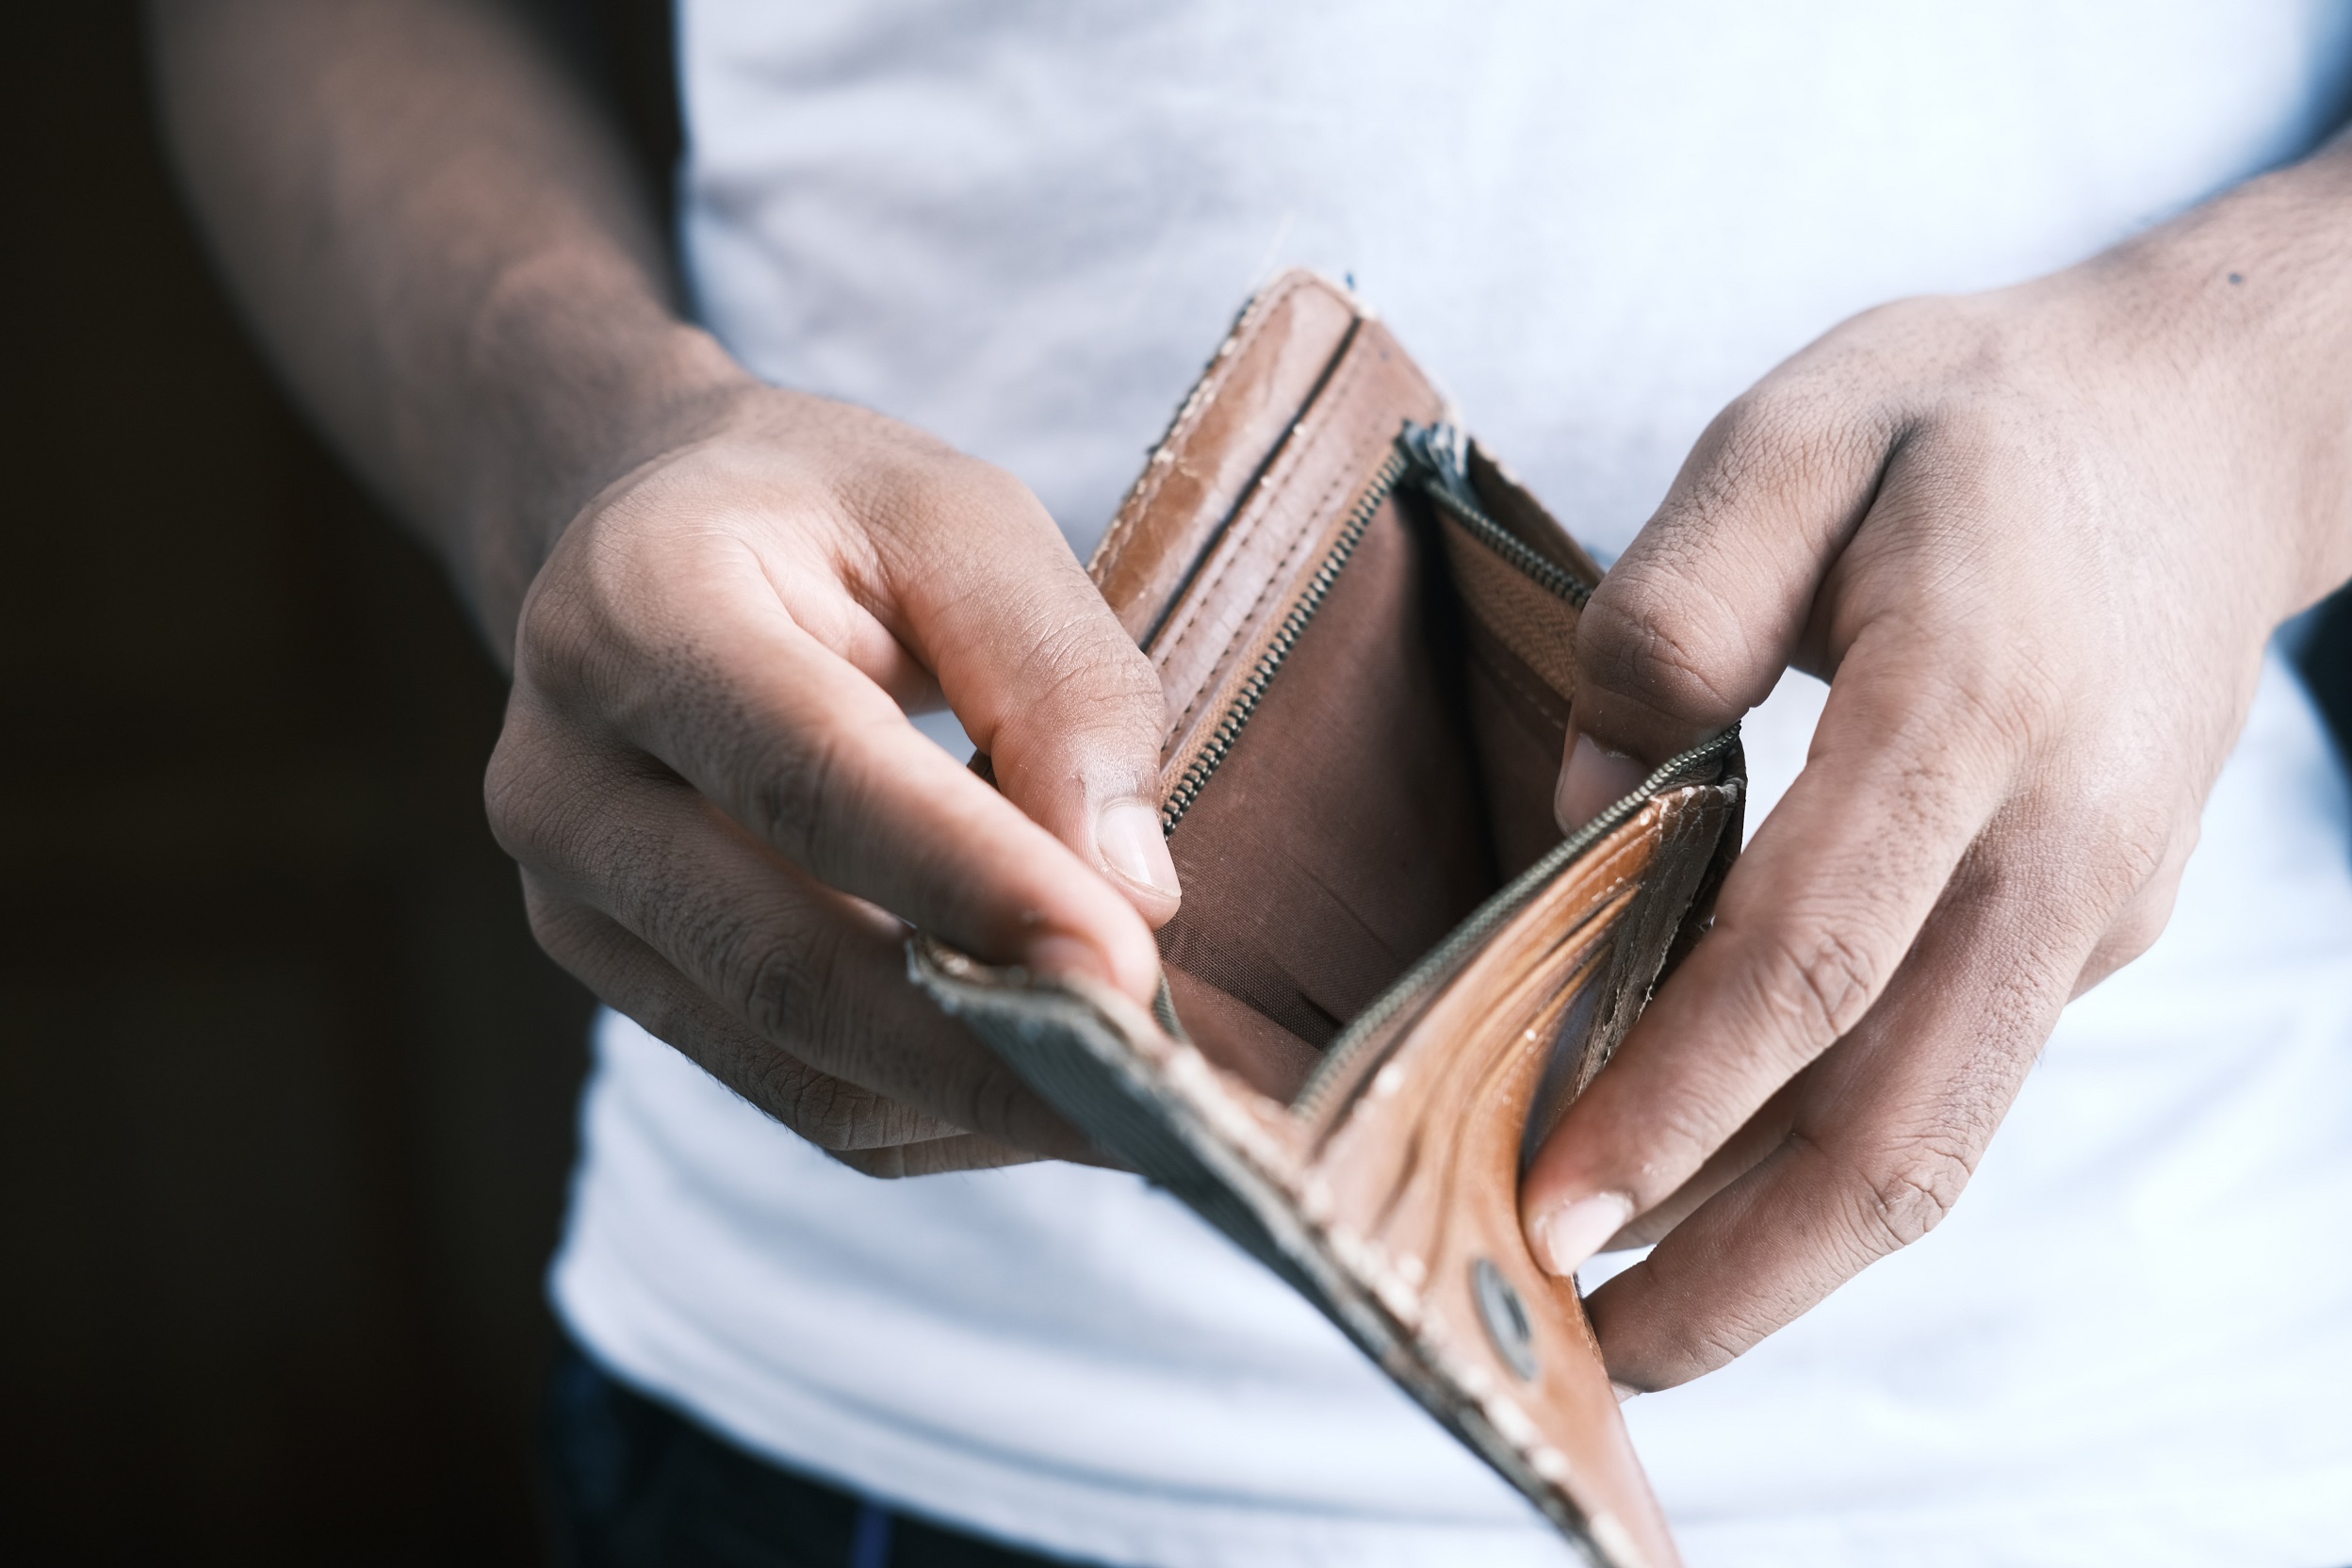 Made financial mistakes and heavily in debt? Here’s how to pay it off fast